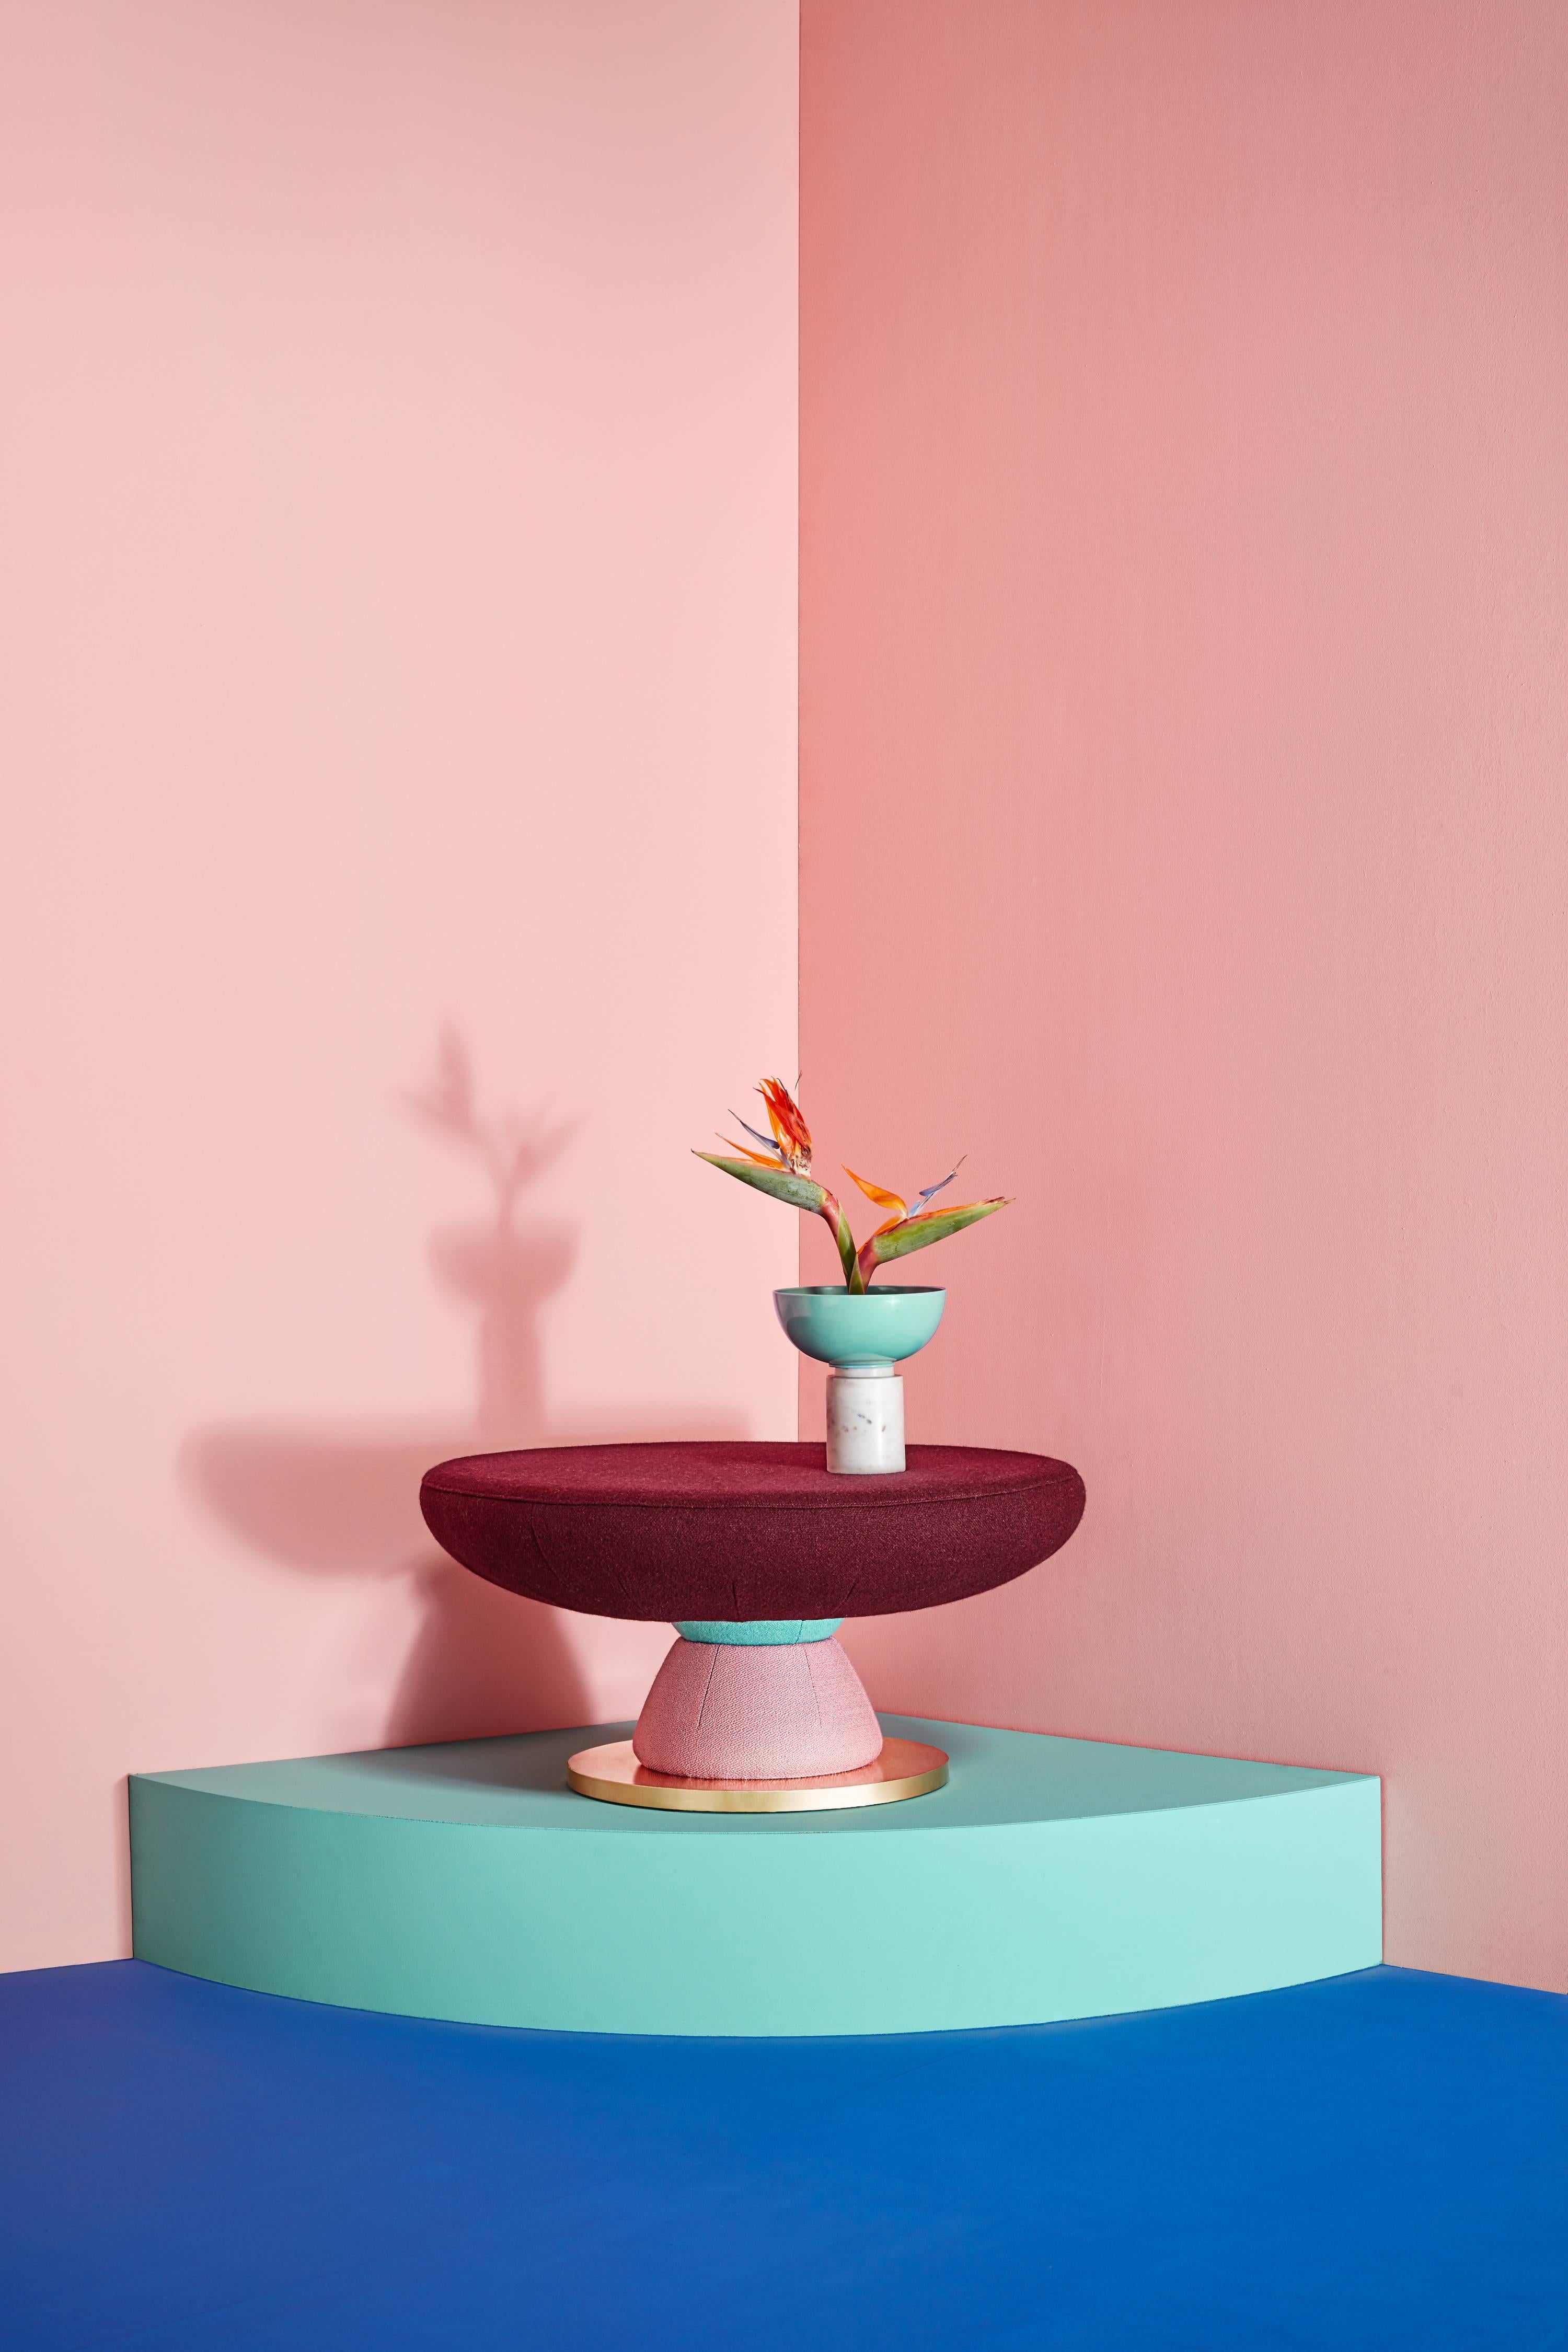 Pair of Toadstool Collection, colorful coffee table by Pepe Albargues
Dimensions and materials:
Pair of Toadstool Collection, colorful coffee table, Masquespacio
Coffee table:
Dimensions: 32 x 72 x 72 cm
Materials:
Pin and particles board